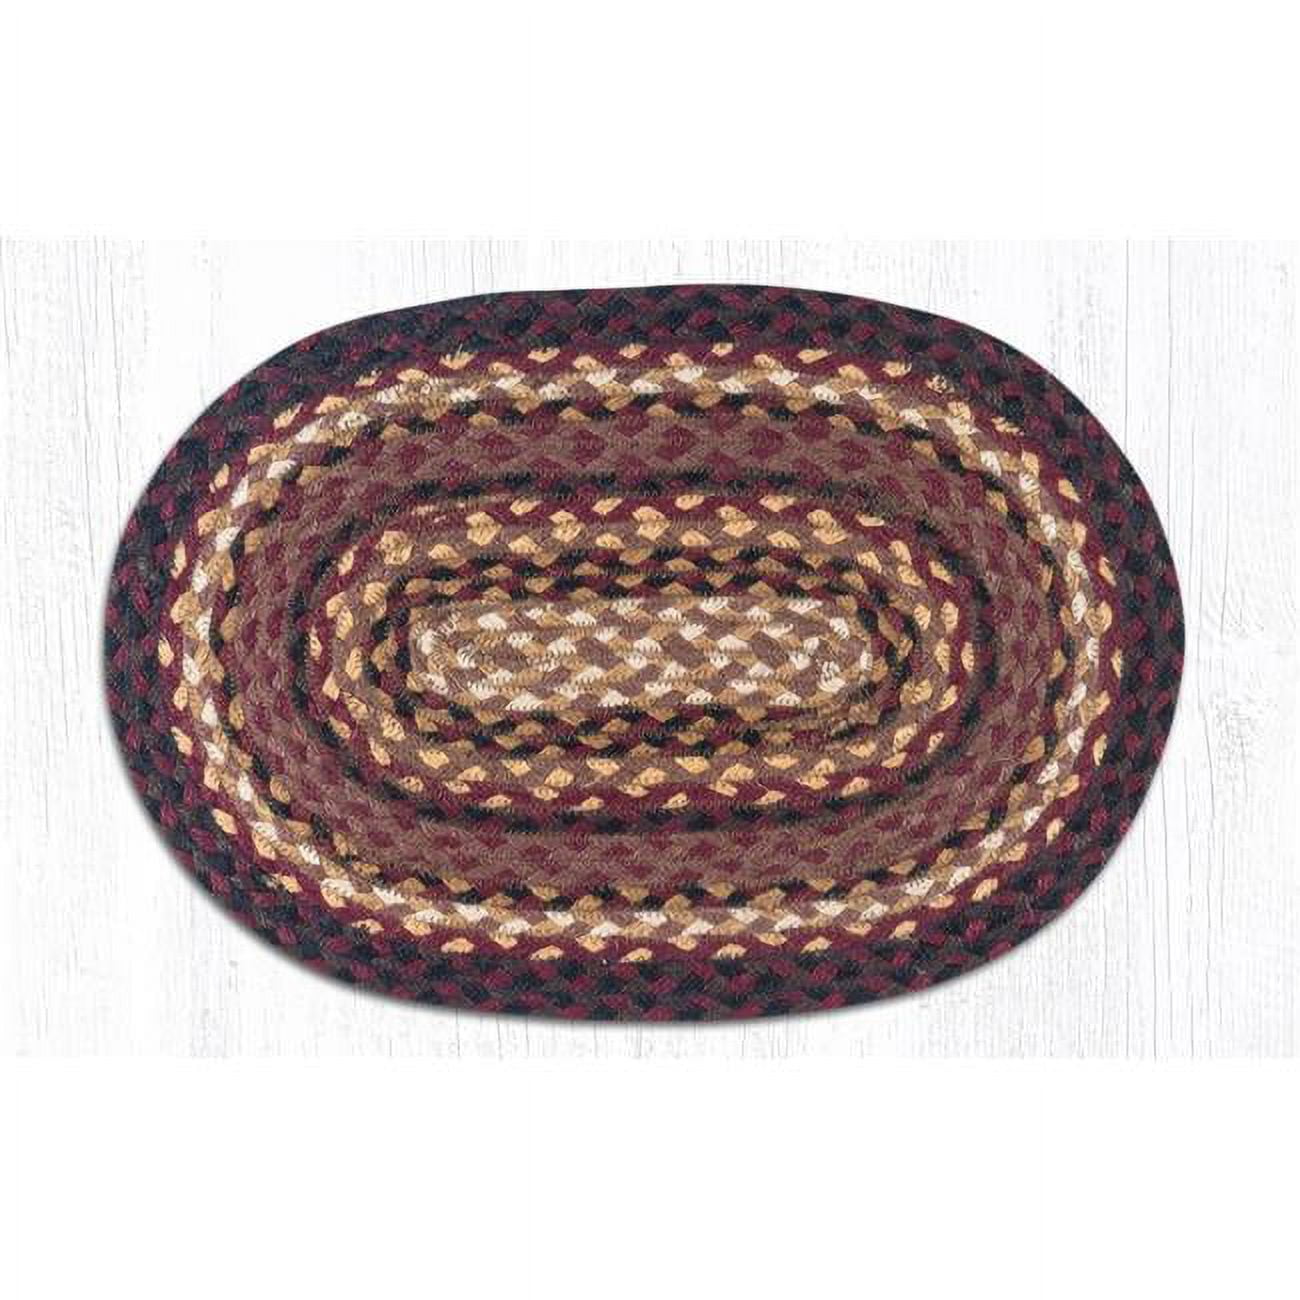 Capitol Importing 52-pm371 13 X 19 In. Jute Oval Placemat - Black Cherry, Chocolate & Cream